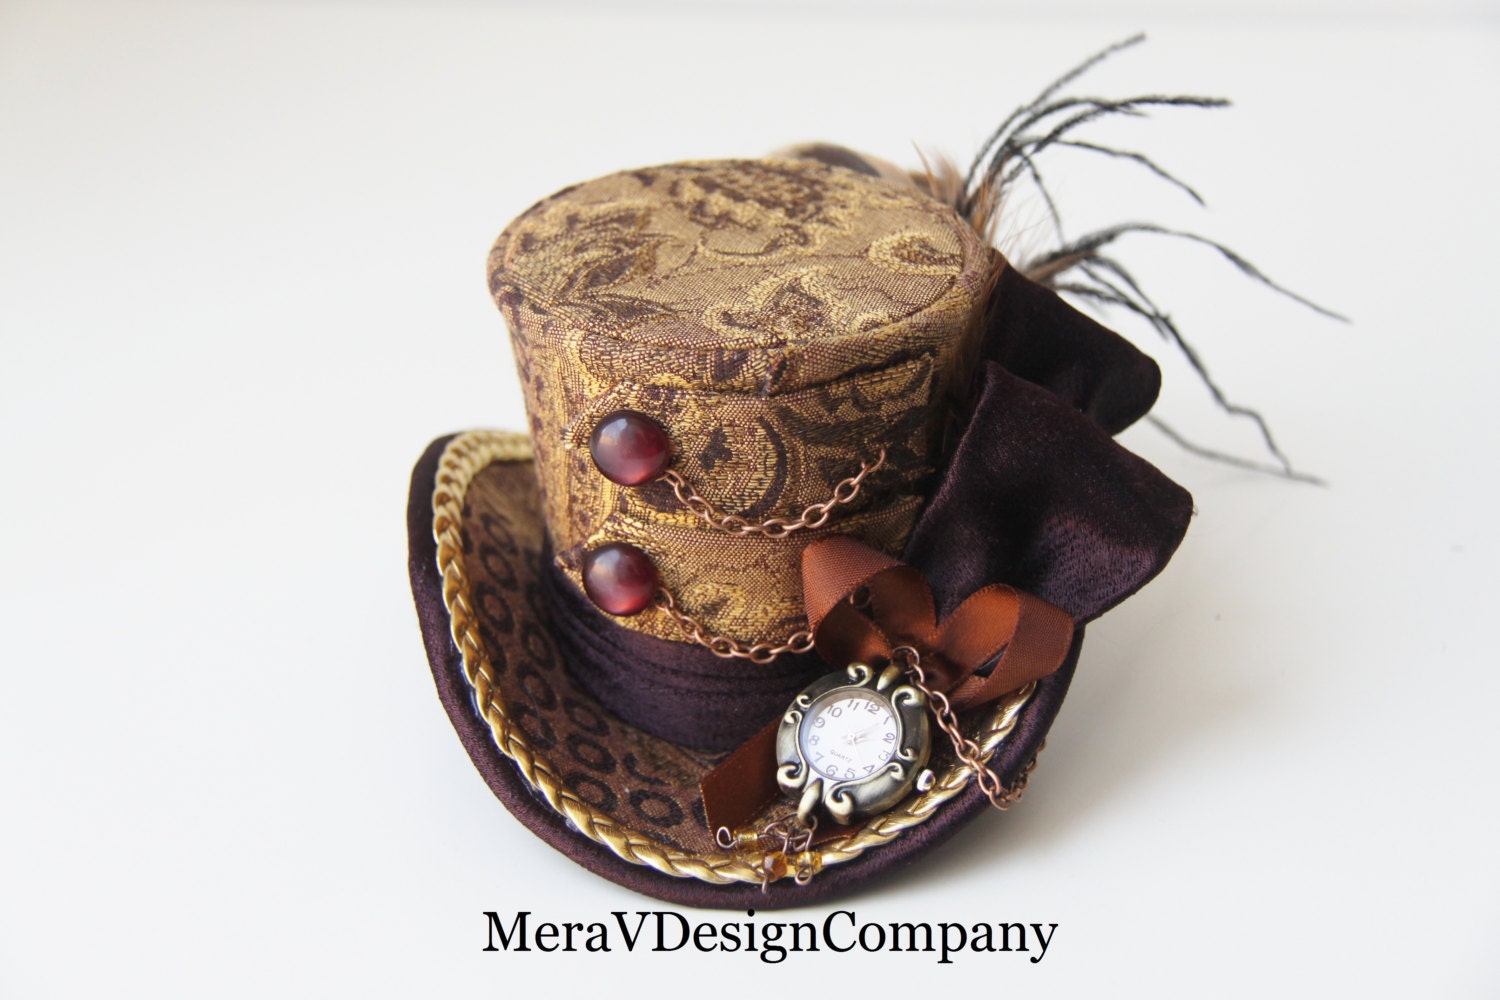 Brown Gold Mini Top Hat, Steampunk, Women Headpiece, Bridal Hat, Party Hat, Mad Hatter Hat, Working Clock, Victorian  Ready To Ship - MeraVDesignCompany